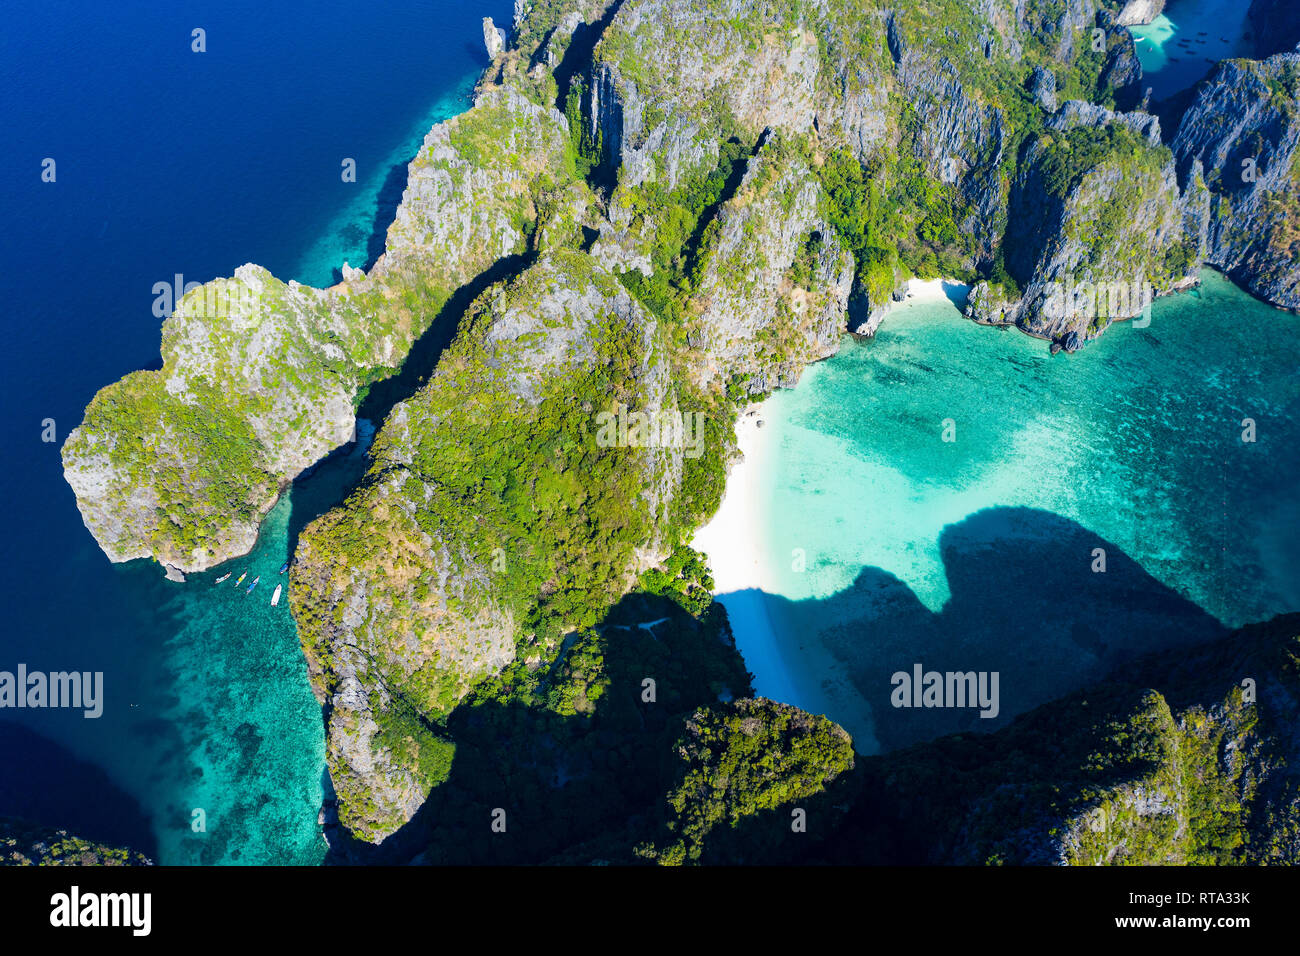 View from above, stunning aerial view of Koh Phi Phi Leh with the beautiful beach of Maya Bay bathed by a turquoise and clear water. Stock Photo